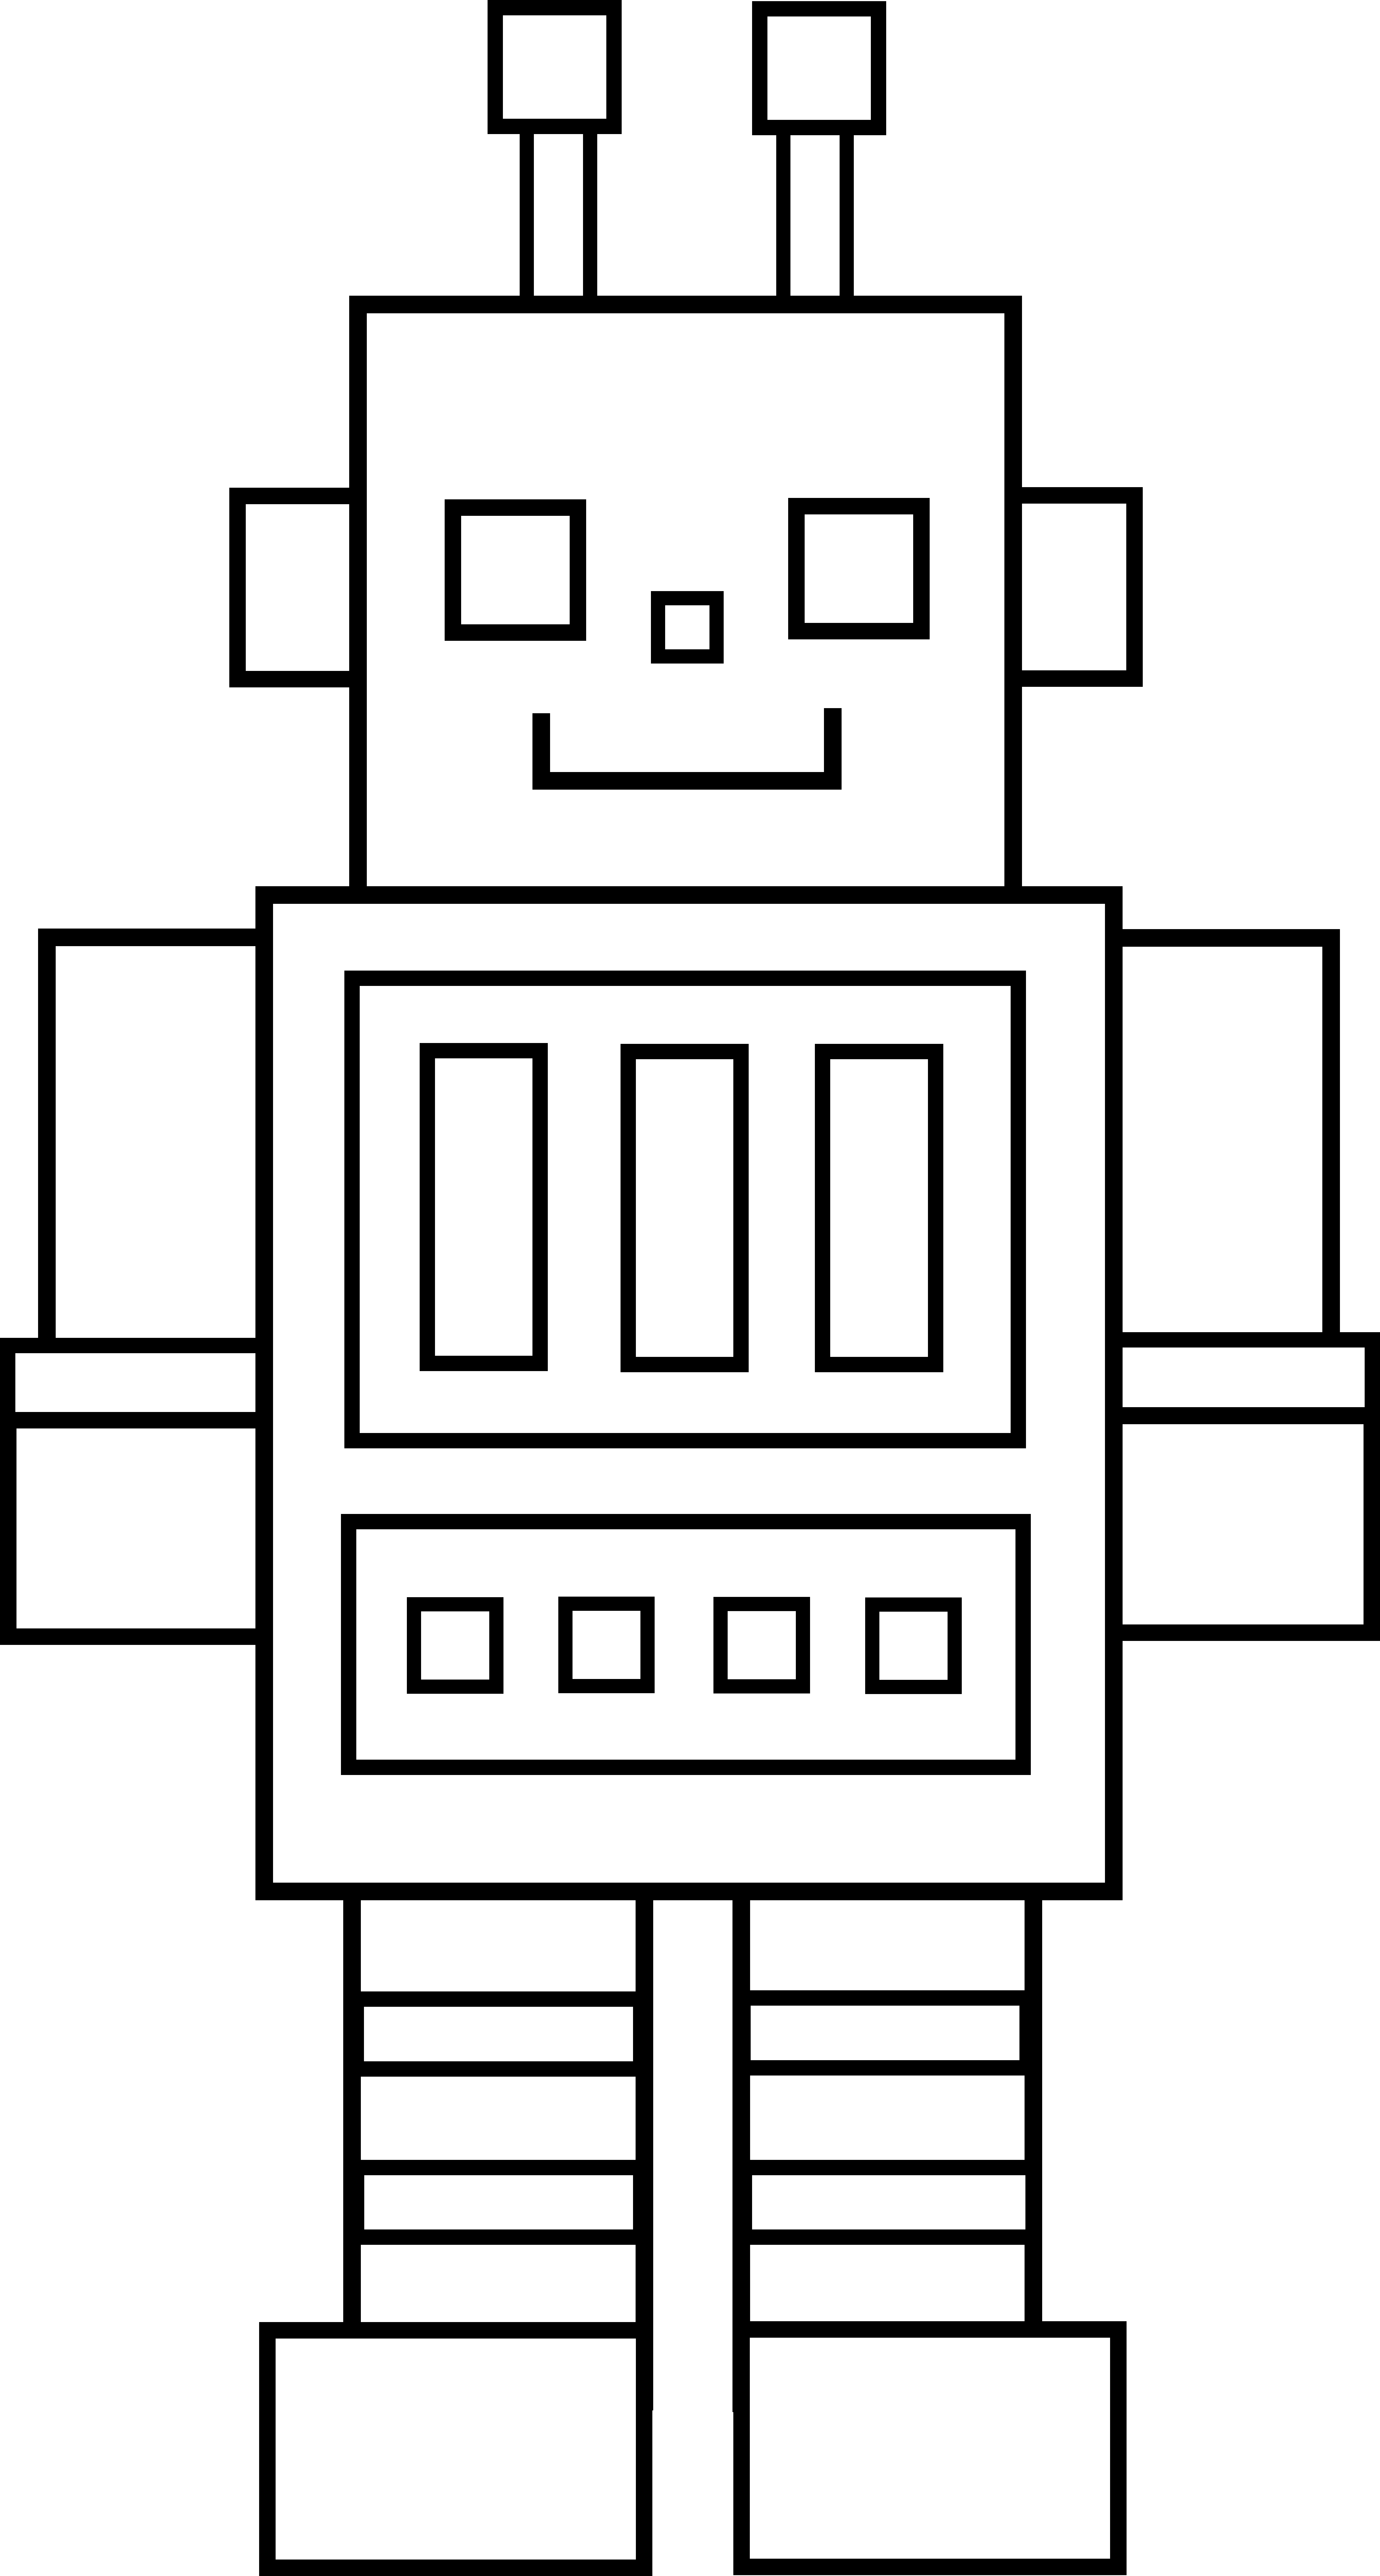 Cute robot girl clipart black and white